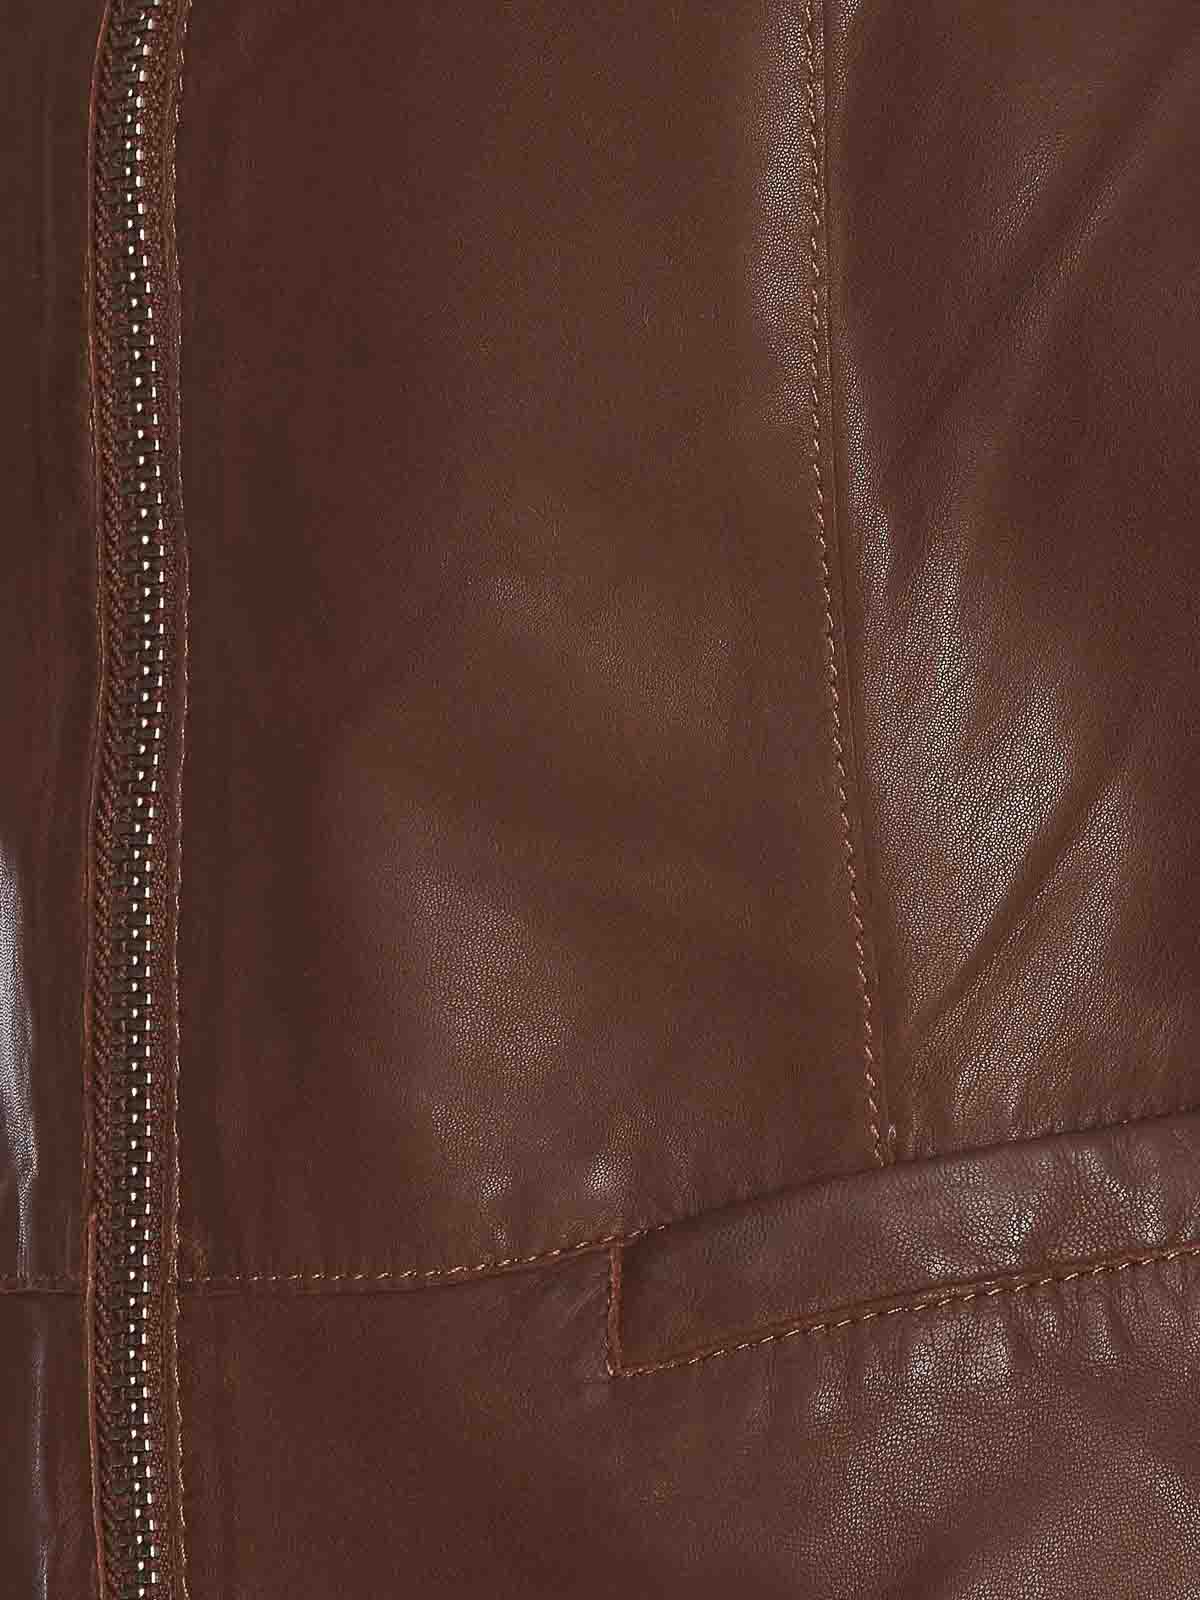 Shop Bully Brown Leather Jacket Frontal Zip Closure